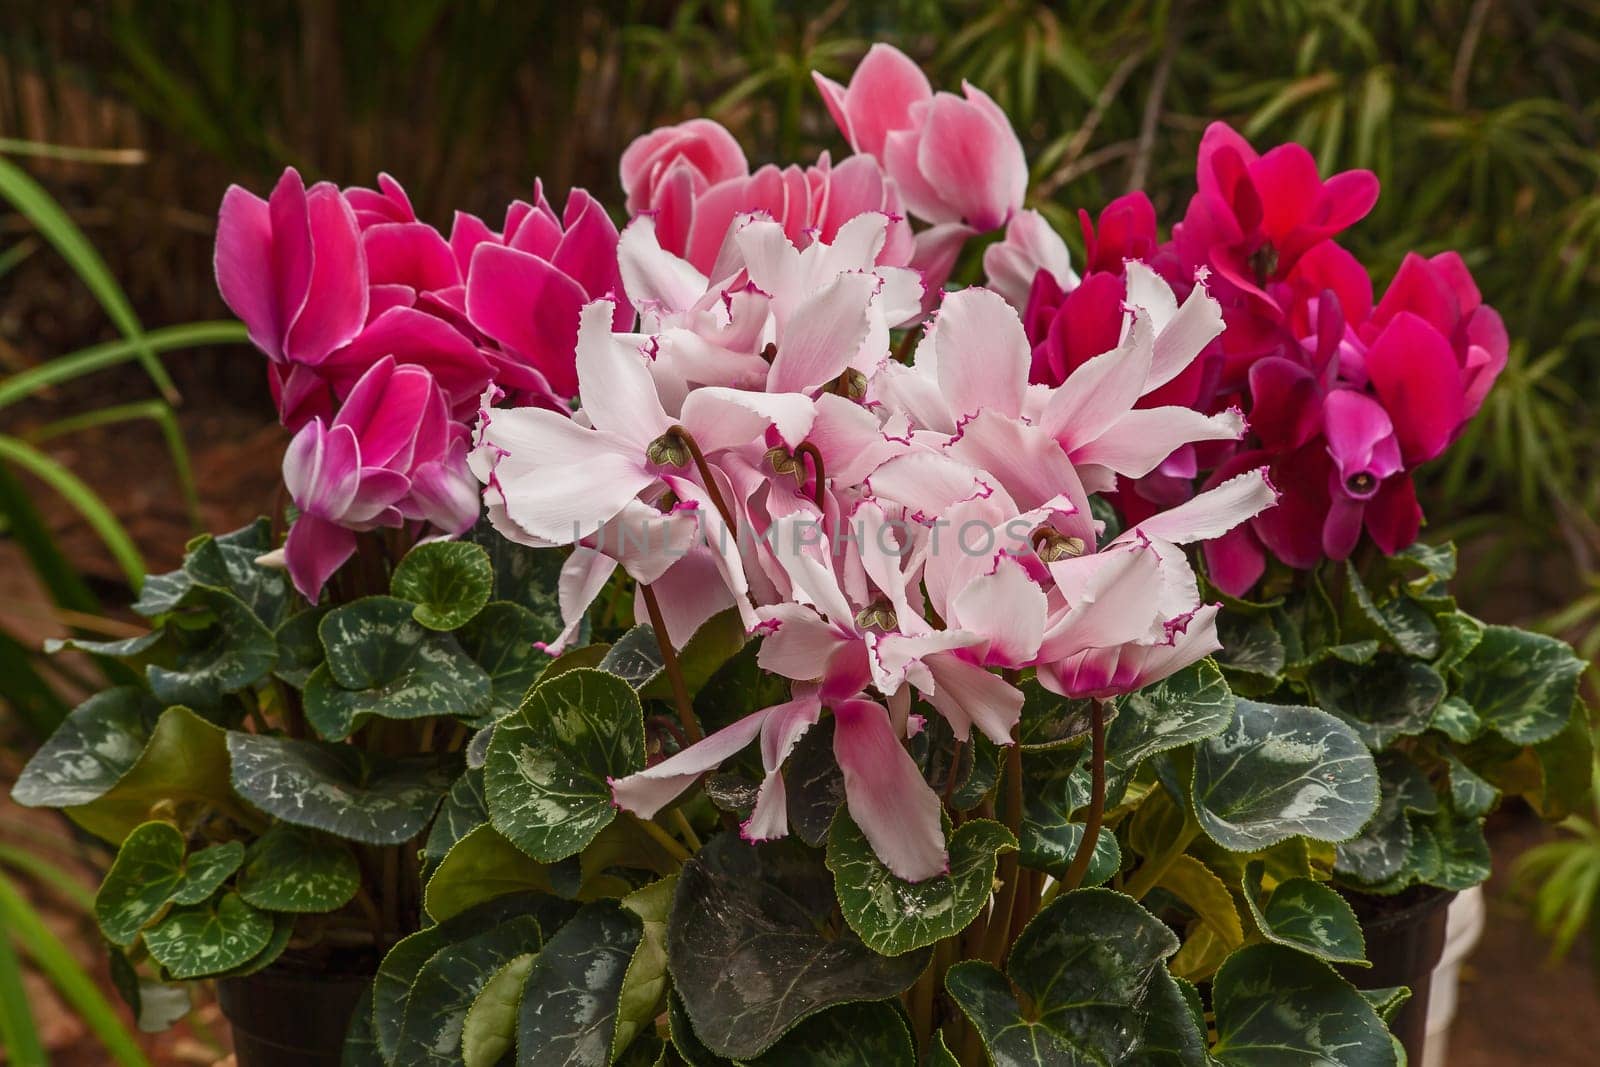 Different shades of pink Cyclamen flowers in a basket